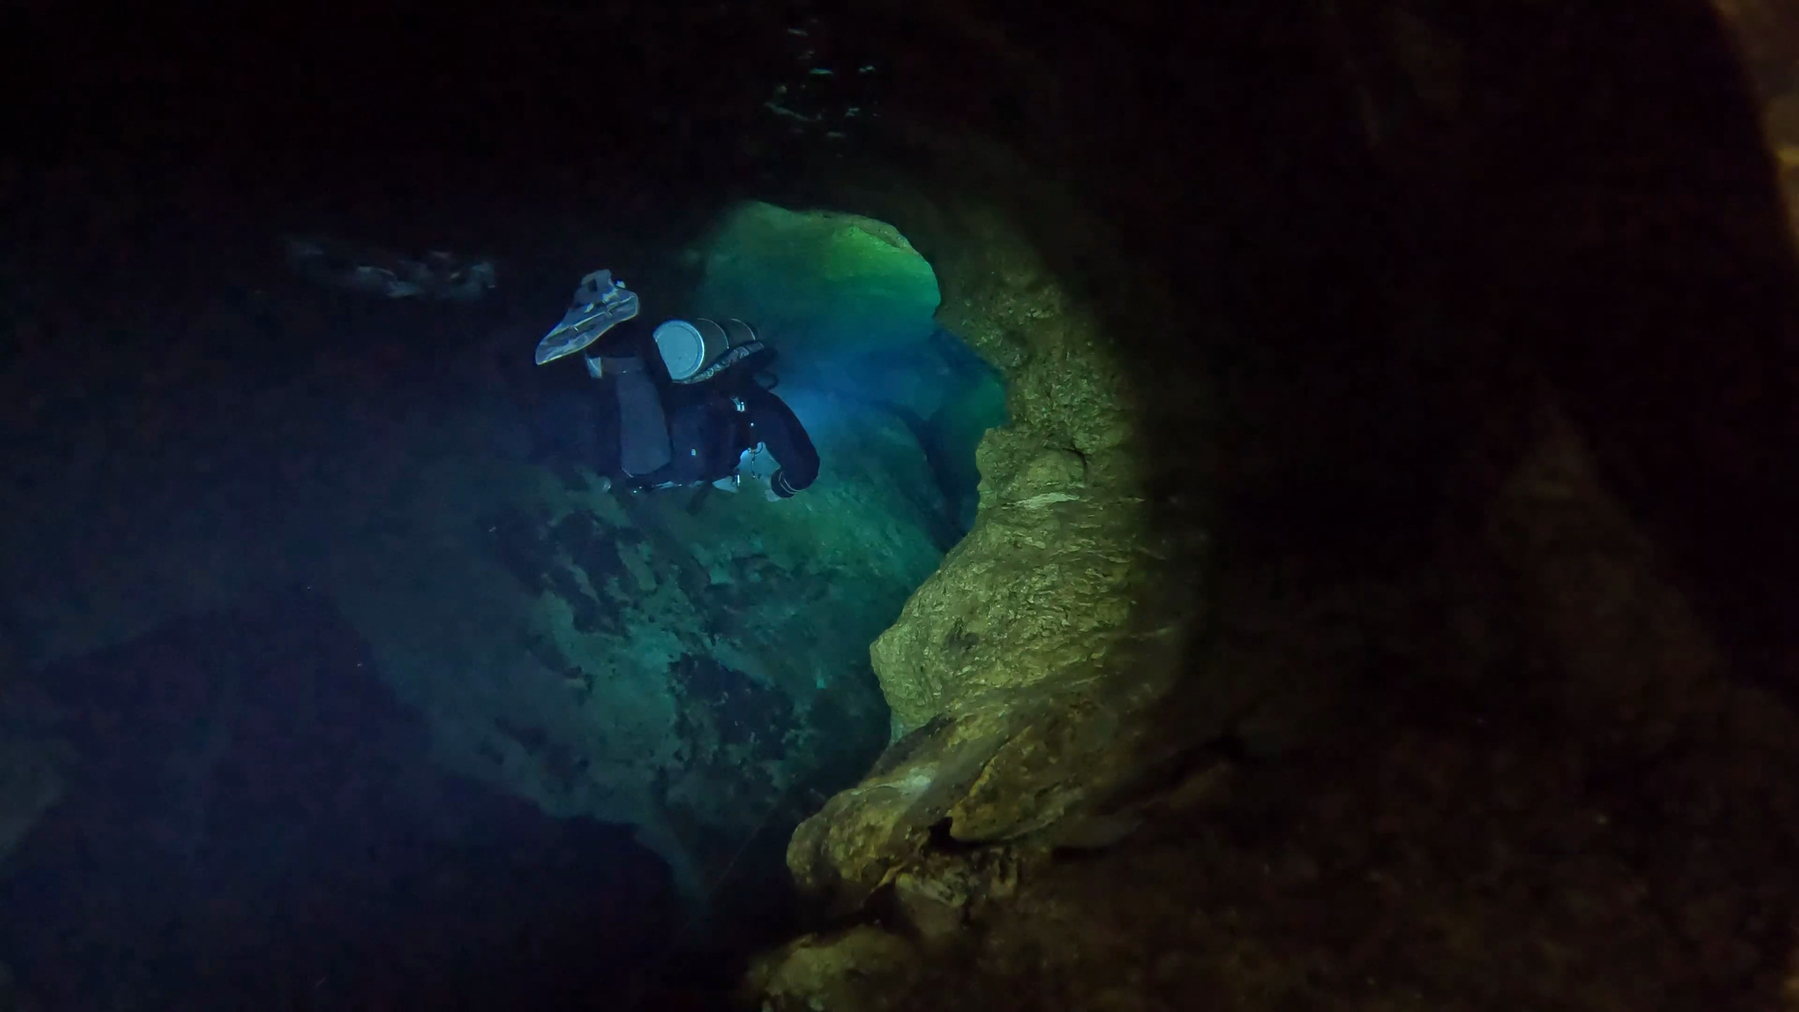 A diver swims down a lava tube in an underwater cave system, his dark drysuit and greyscale camouflage fins lit by a team mates primary light, as it illuminates the walls of the cave in greens and blues.